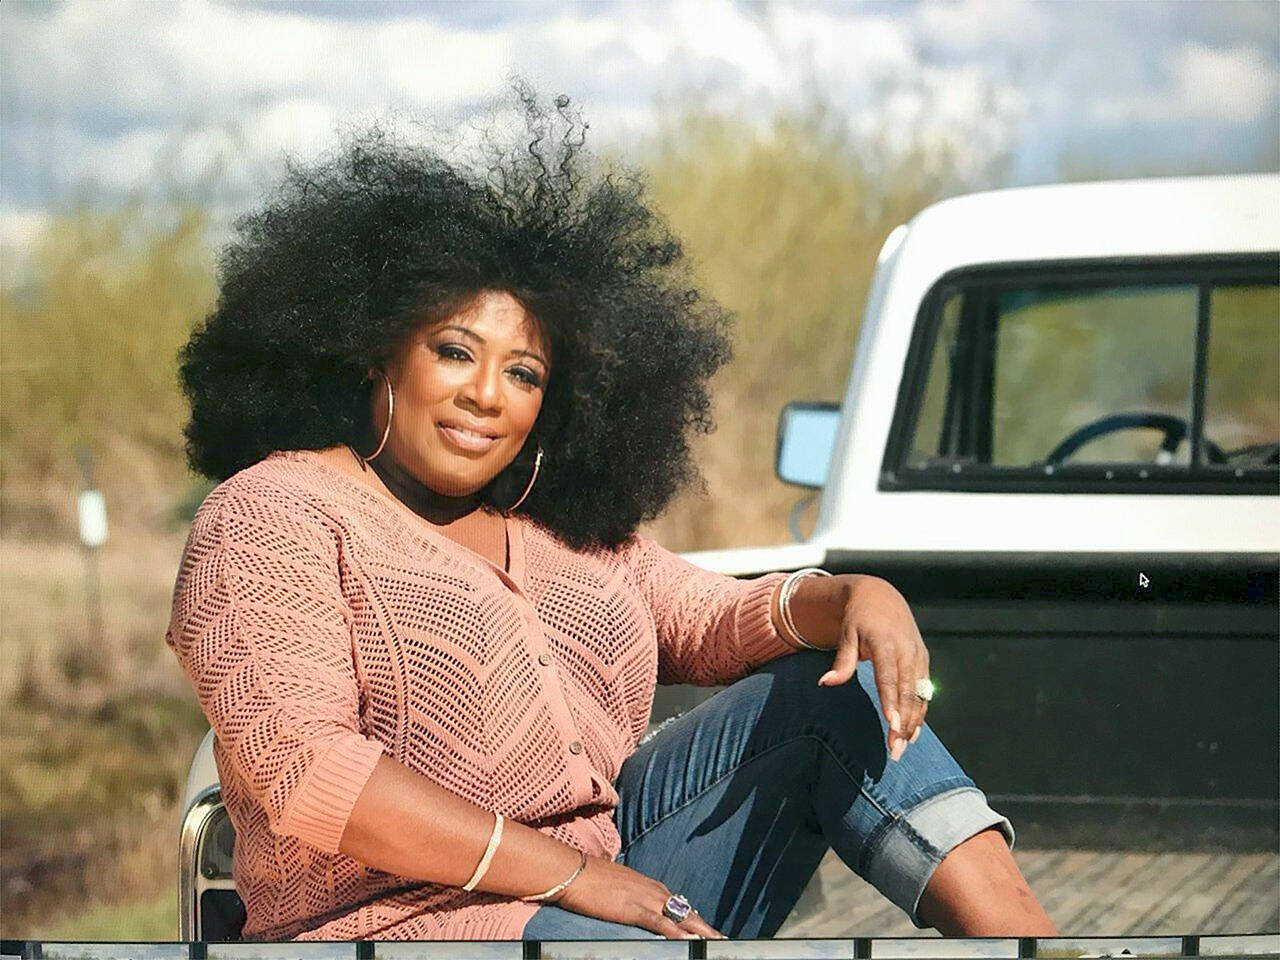 Blues-soul singer Lady A will bring her band to Port Angeles for the Juan de Fuca Festival next weekend. (photo by Dawn Lucrisia-Johnson)